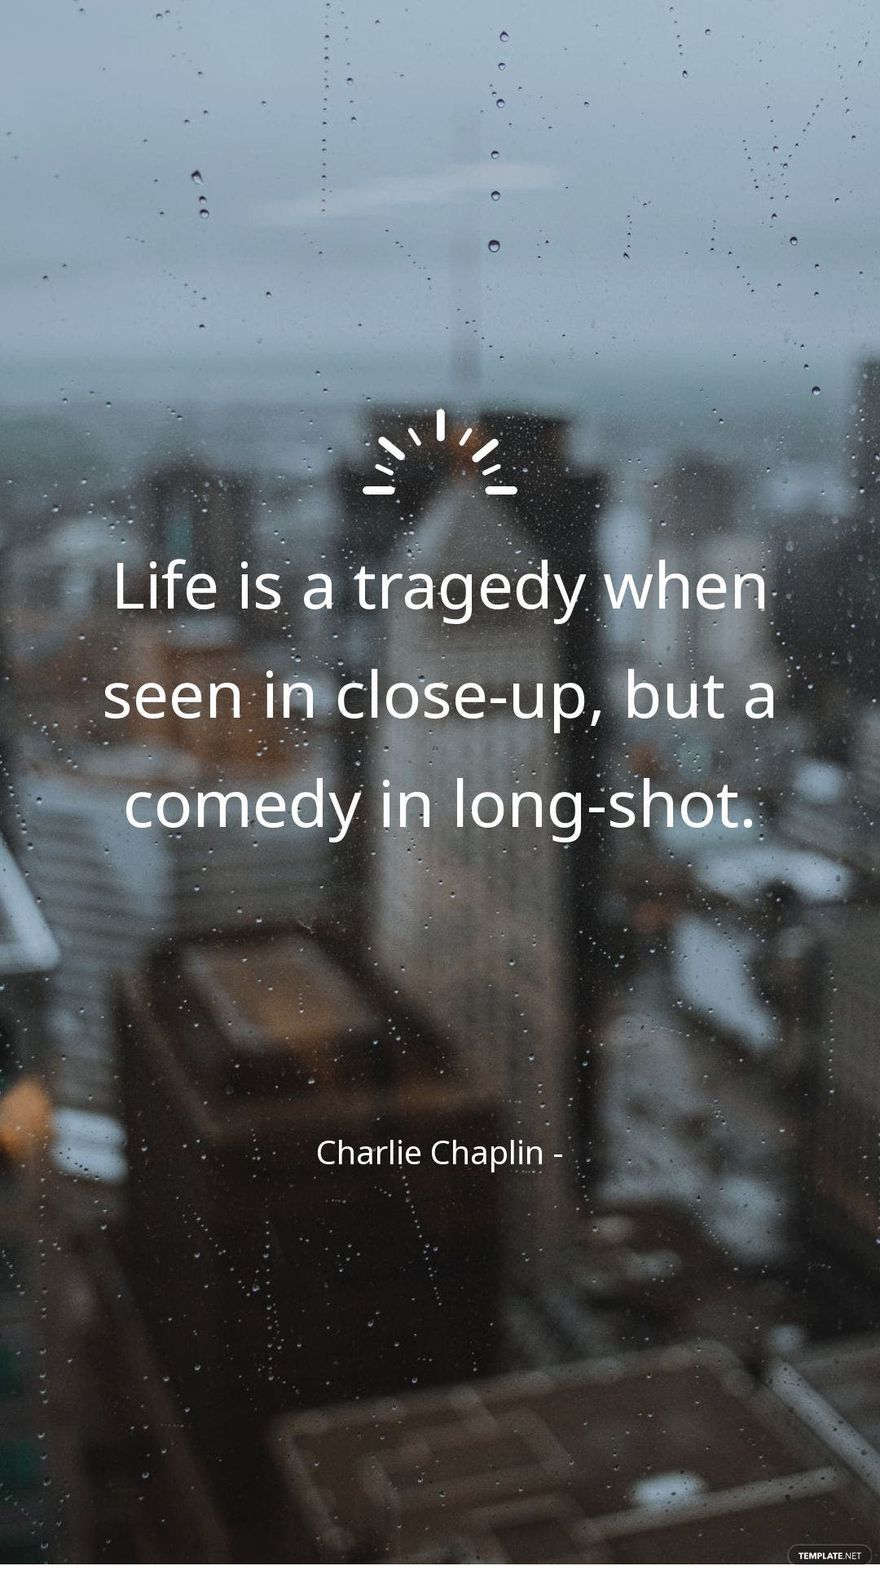 Charlie Chaplin - Life is a tragedy when seen in close-up, but a comedy in long-shot.